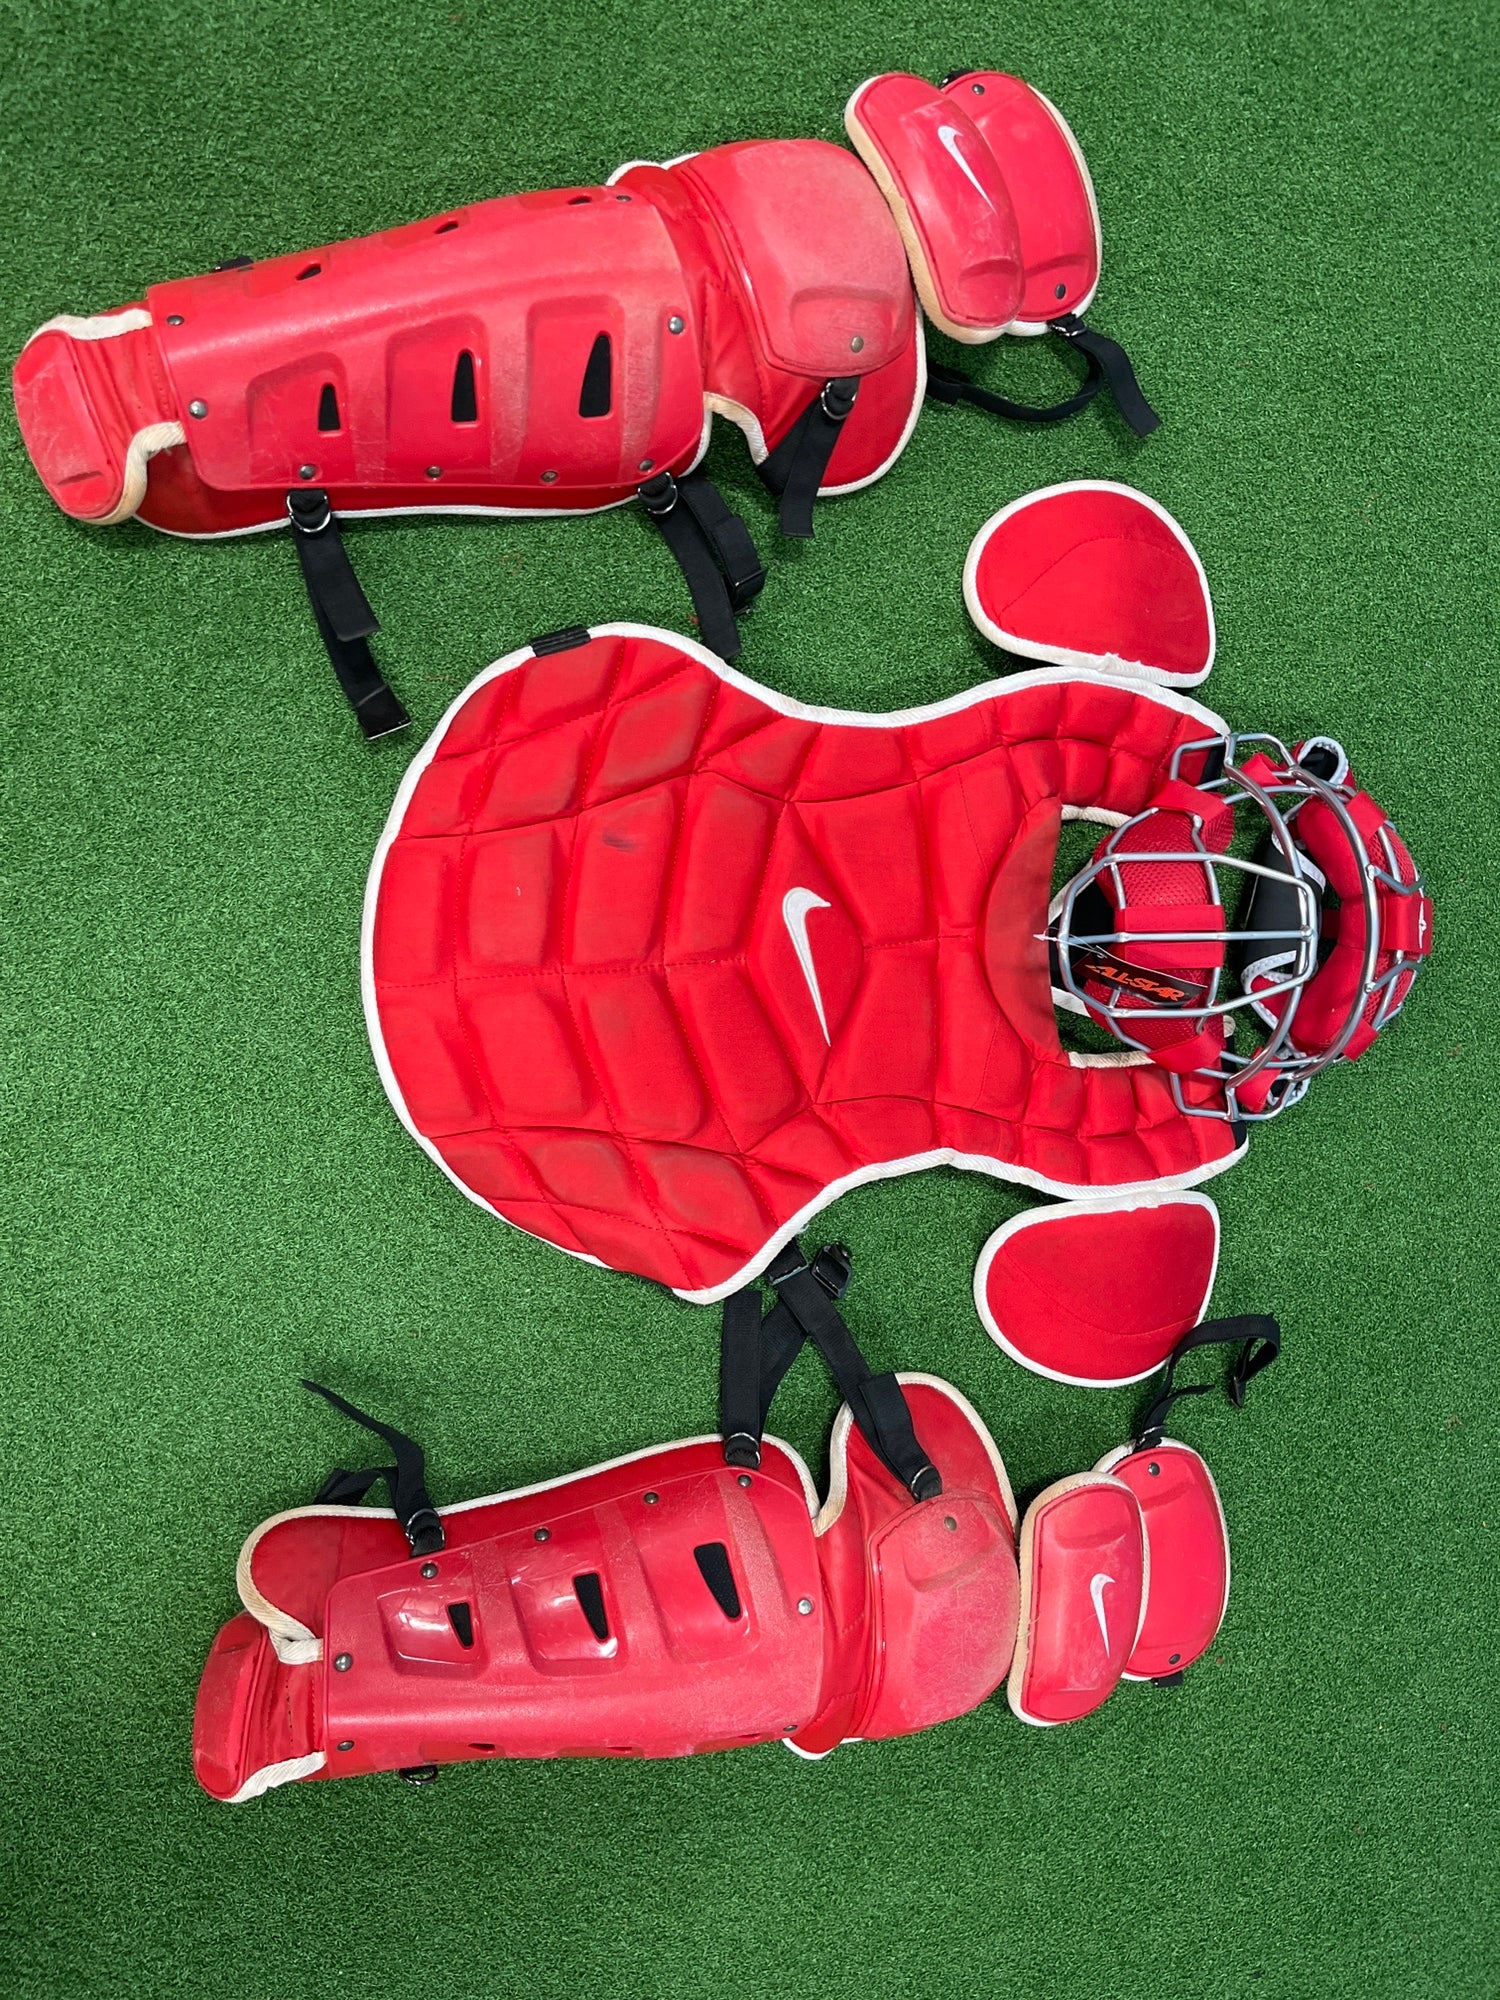 Brand New Nike Catchers Gear 16-17 Navy Black Red Adult Size